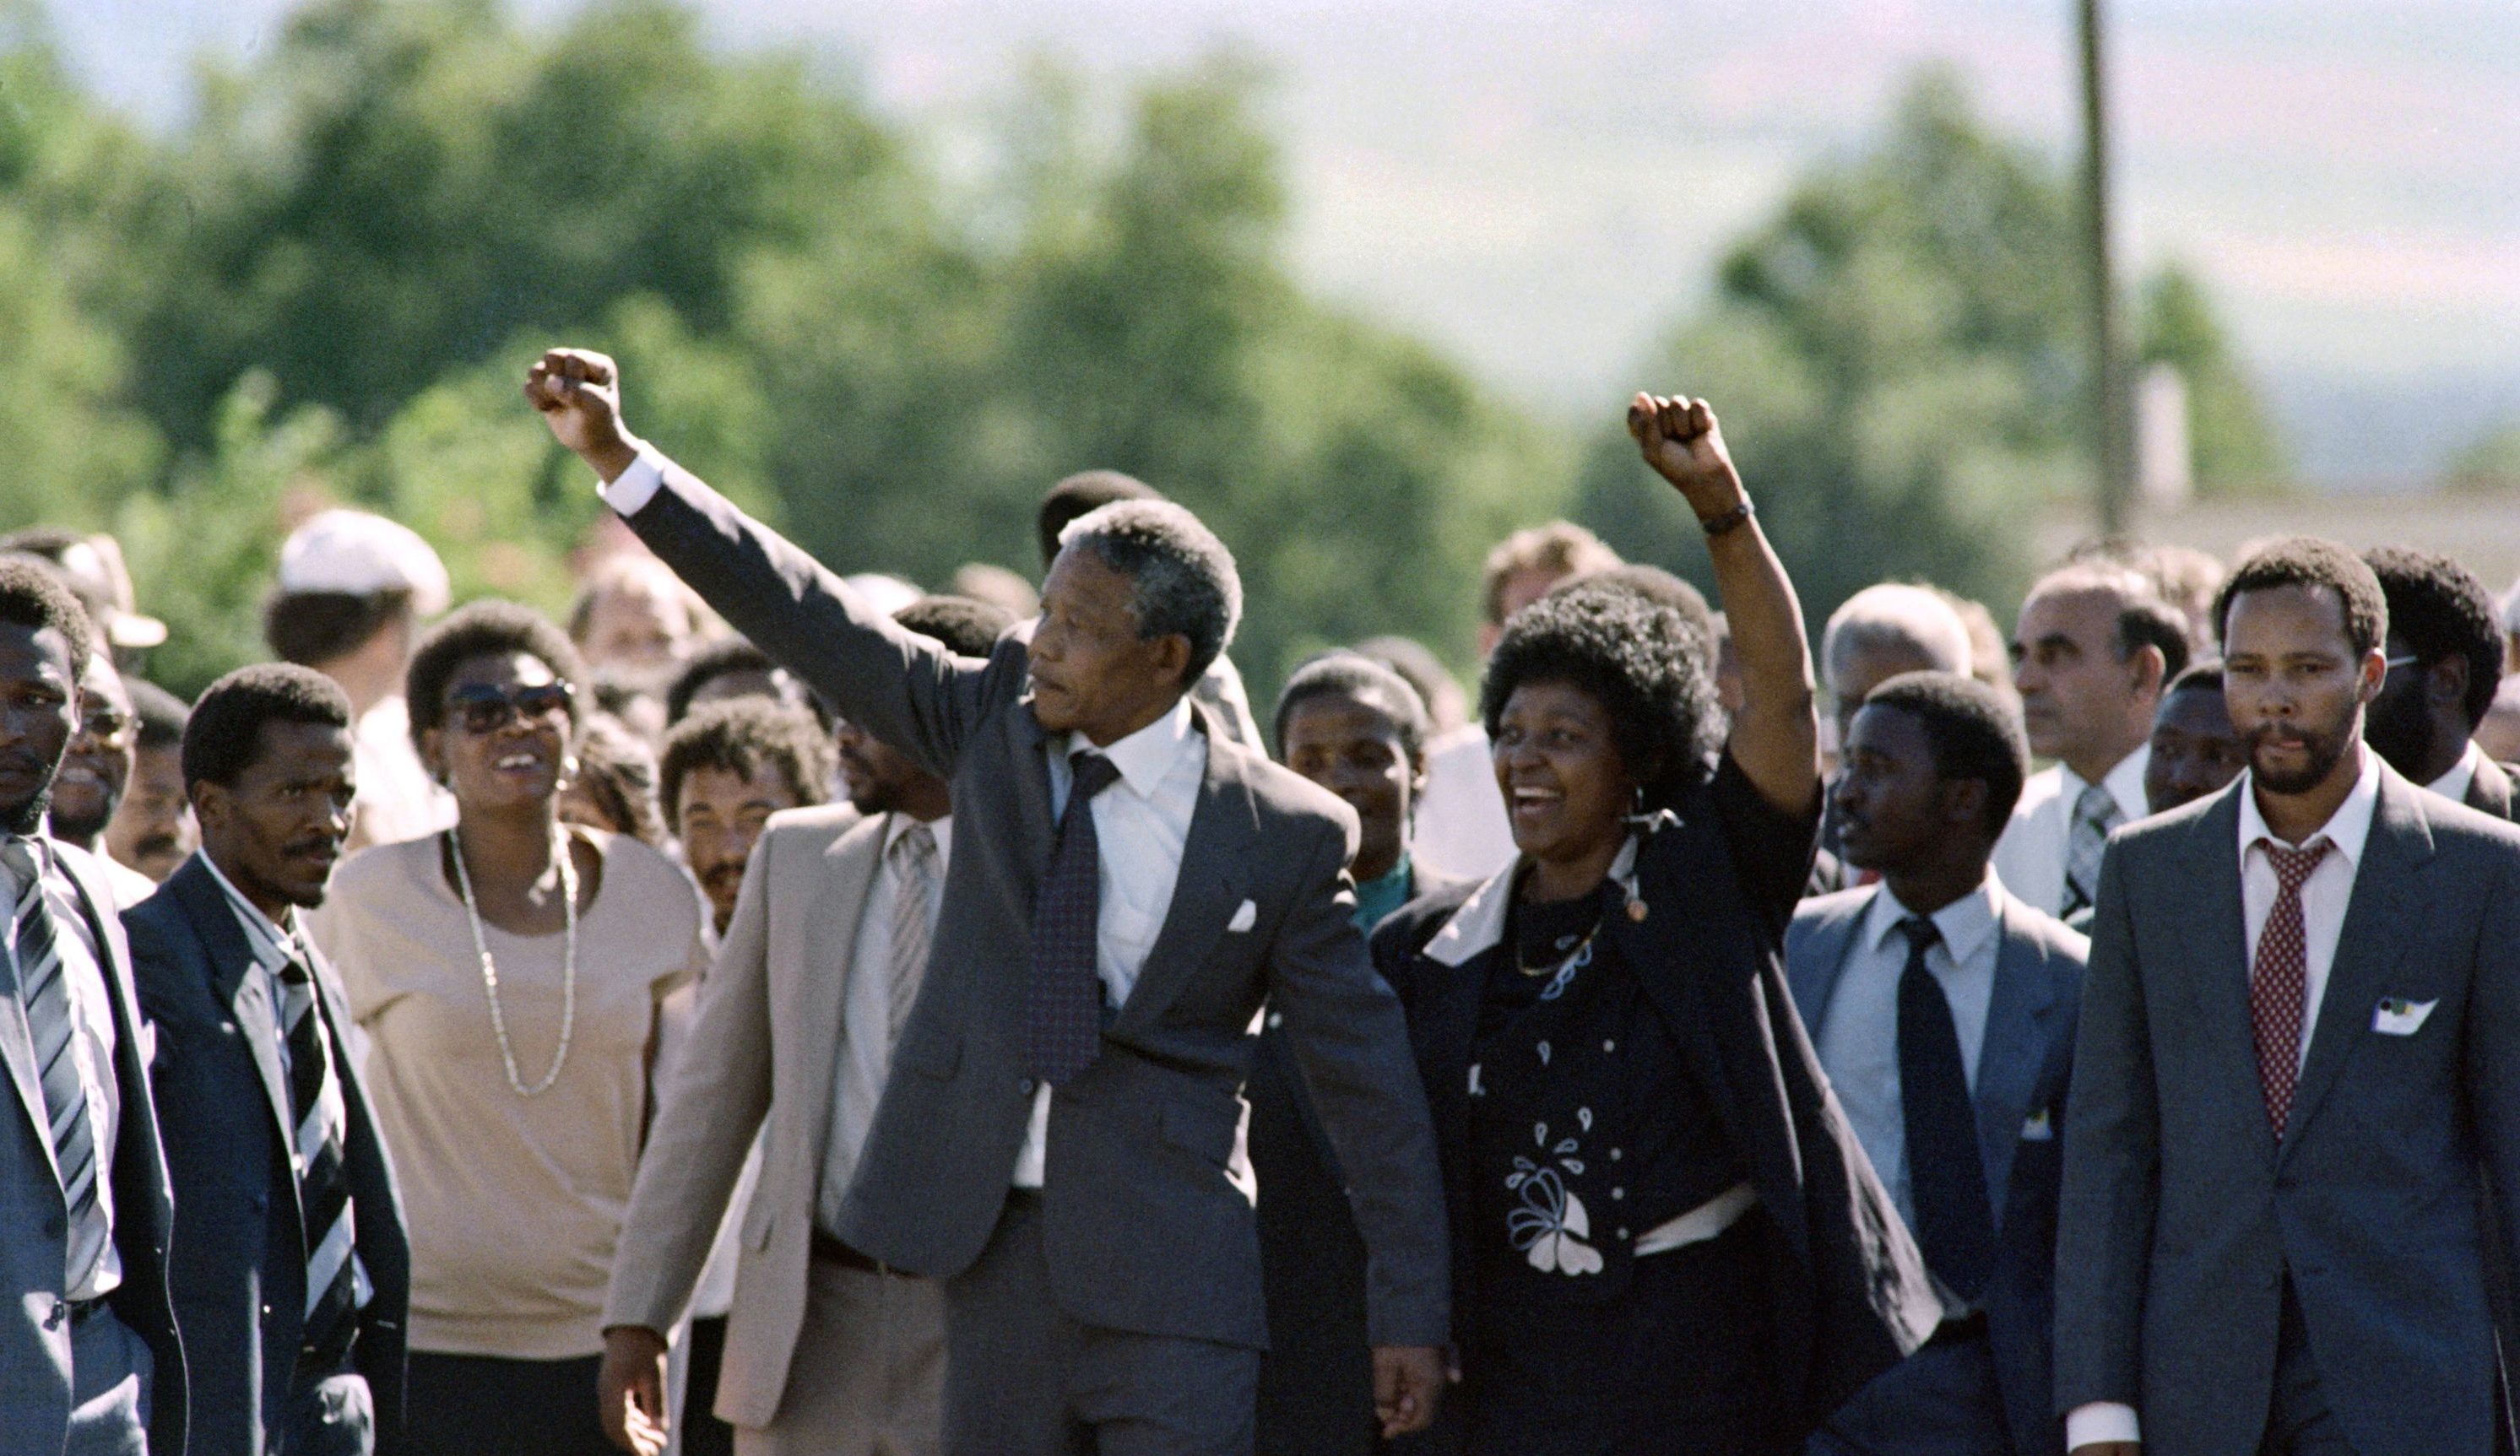 Nelson Mandela and his wife Winnie raise fists upon Mandela's release from Victor Verster prison on February 11, 1990 in Paarl. (ALEXANDER JOE/AFP/Getty Images)